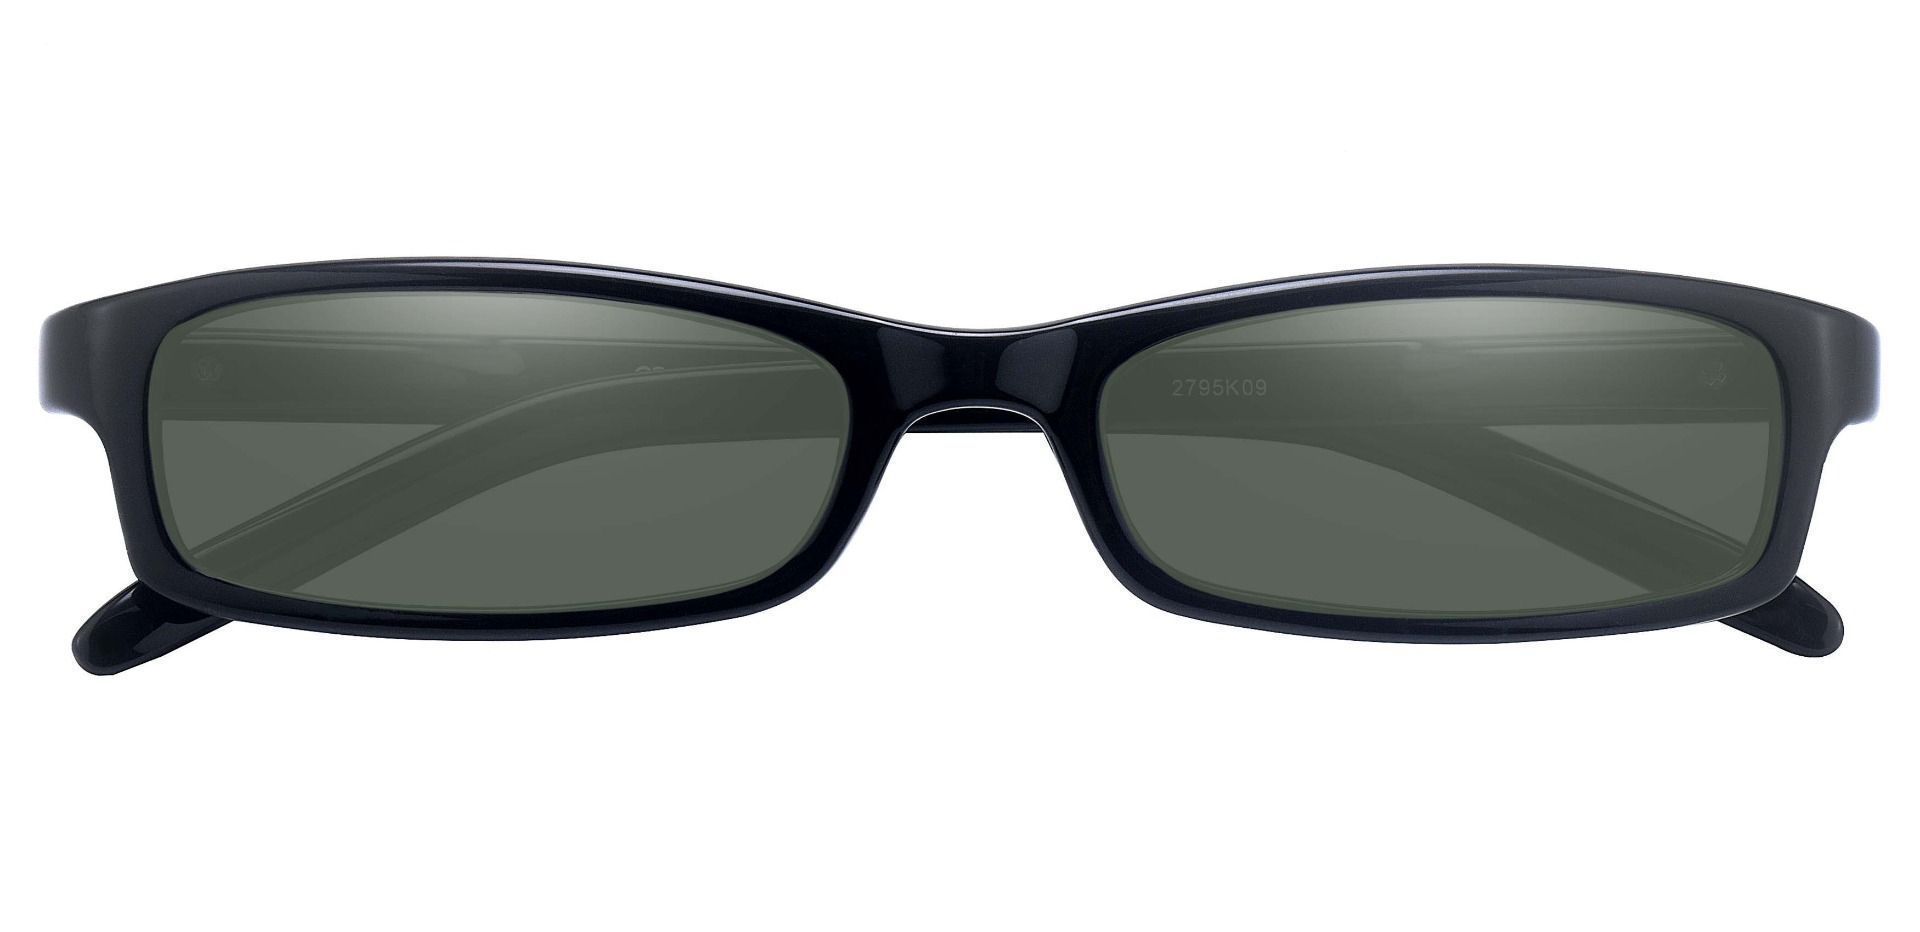 Palmer Rectangle Non-Rx Sunglasses - Black Frame With Green Lenses ...